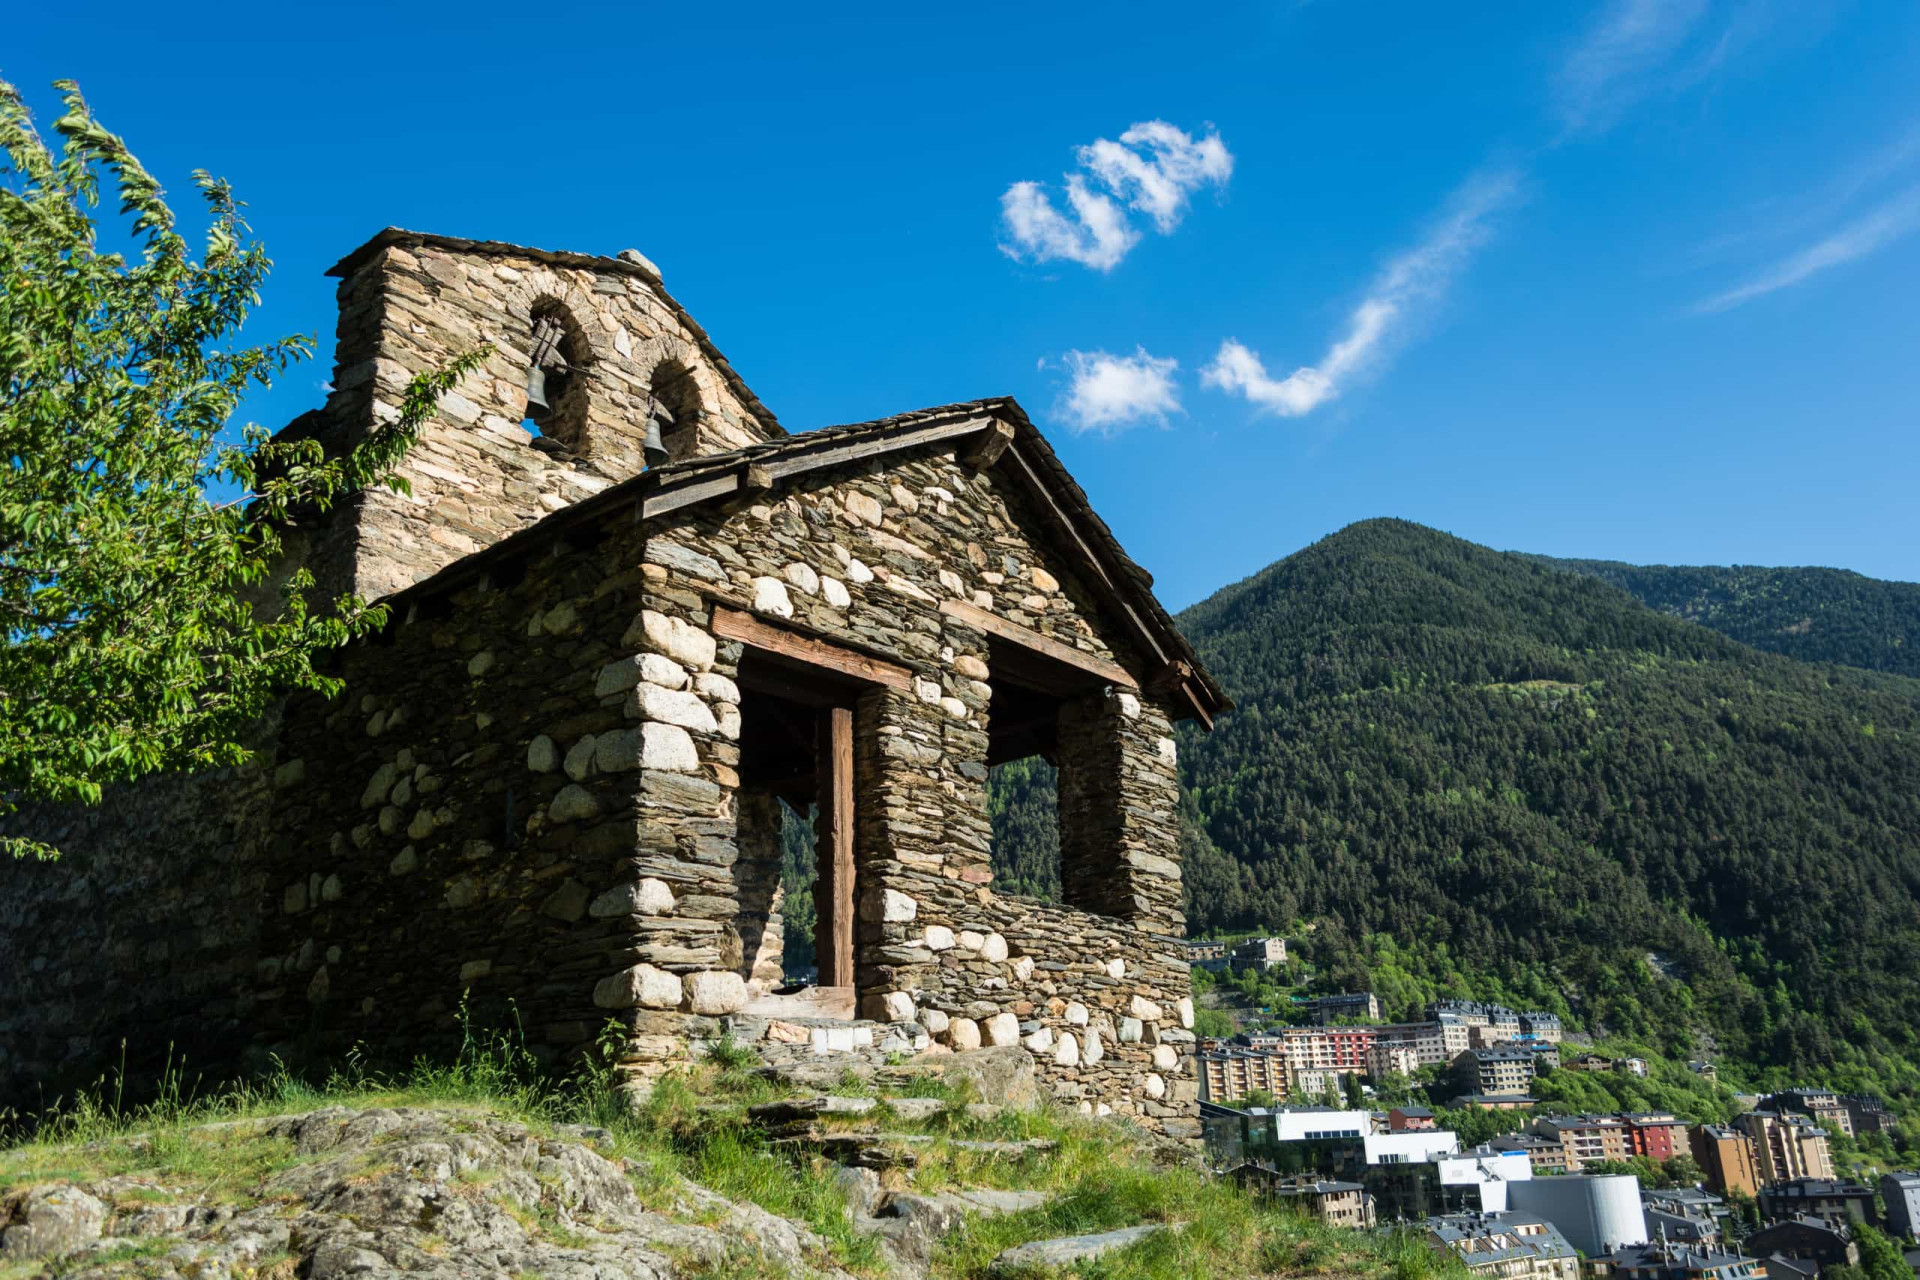 <p>Romanesque churches and ruins are scattered all across Andorra. One of the oldest, the church of Sant Romà de les Bons, is just on the outskirts of Encamp. Built in 1164, it is registered by the Cultural Heritage of Andorra organization.</p><p>You may also like:<a href="https://www.starsinsider.com/n/225345?utm_source=msn.com&utm_medium=display&utm_campaign=referral_description&utm_content=597567en-za"> Cringeworthy moments when celebrities called out their interviewers</a></p>